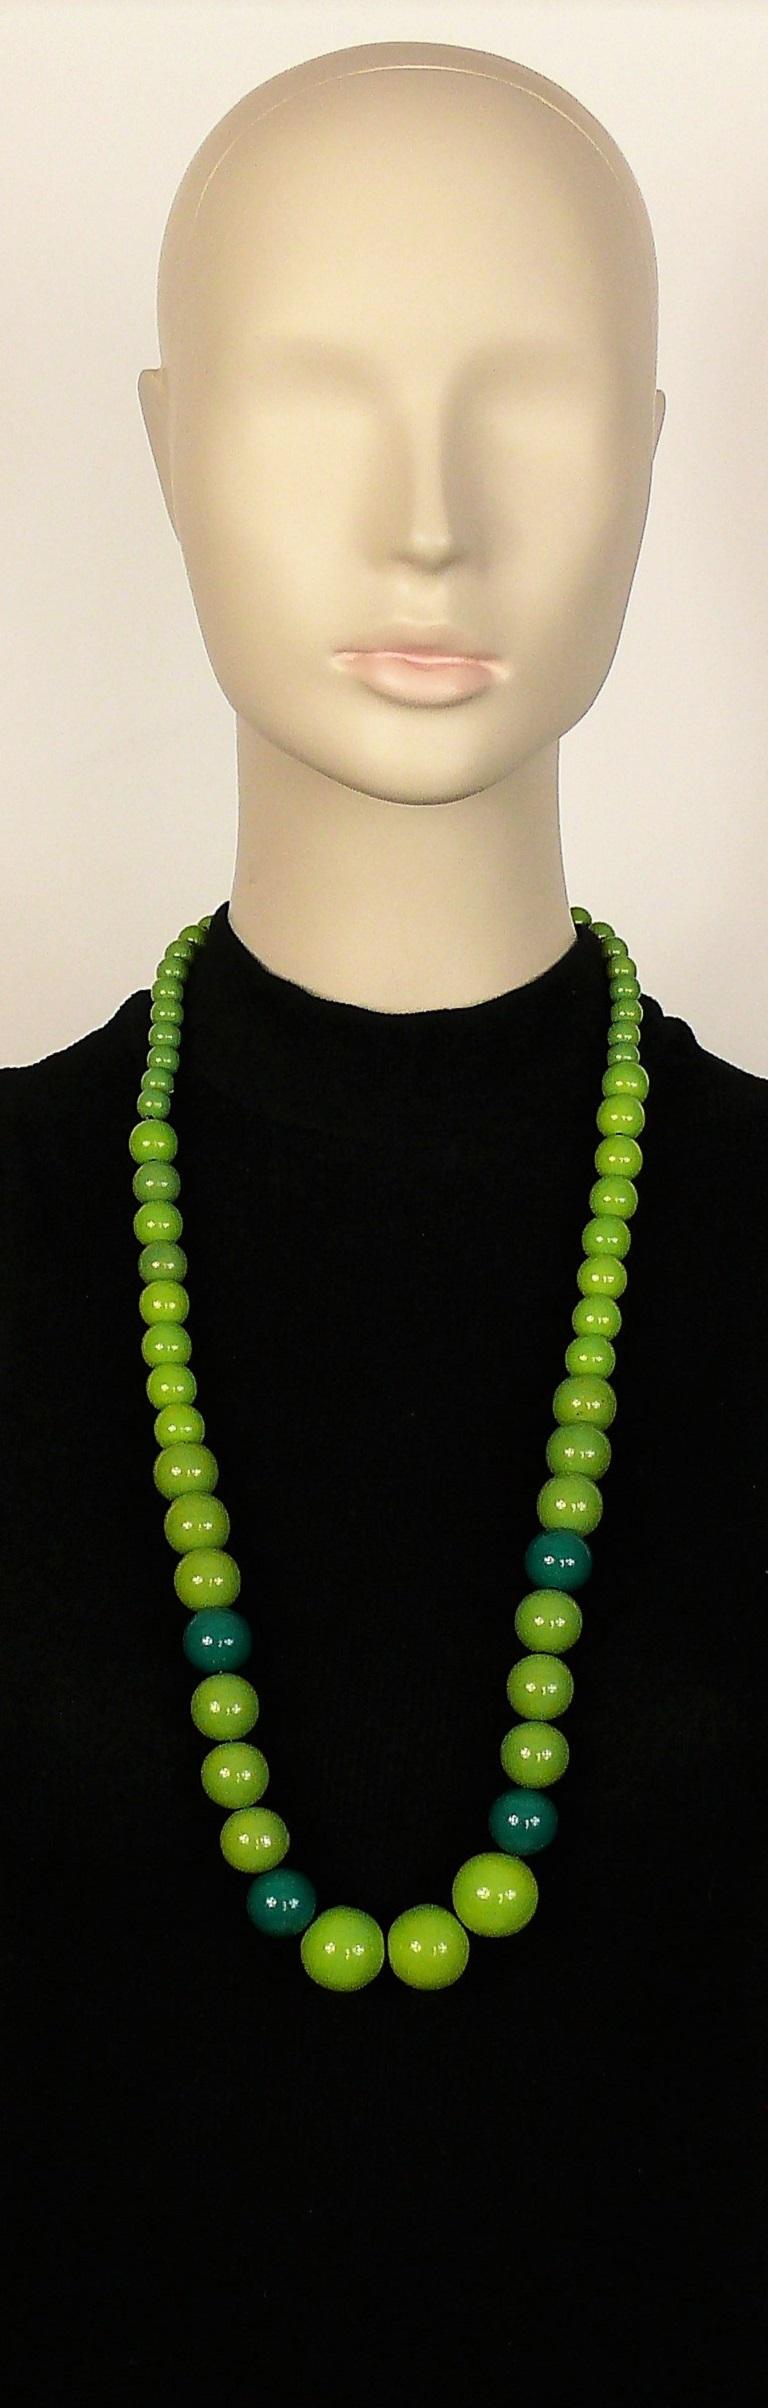 YVES SAINT LAURENT vintage 1970s necklace featuring graduated green resin beads.

Embossed YSL on a metal tag.

Indicative measurements : length worn approx. 37 cm (14.57 inches).

JEWELRY CONDITION CHART
- New or never worn : item is in pristine